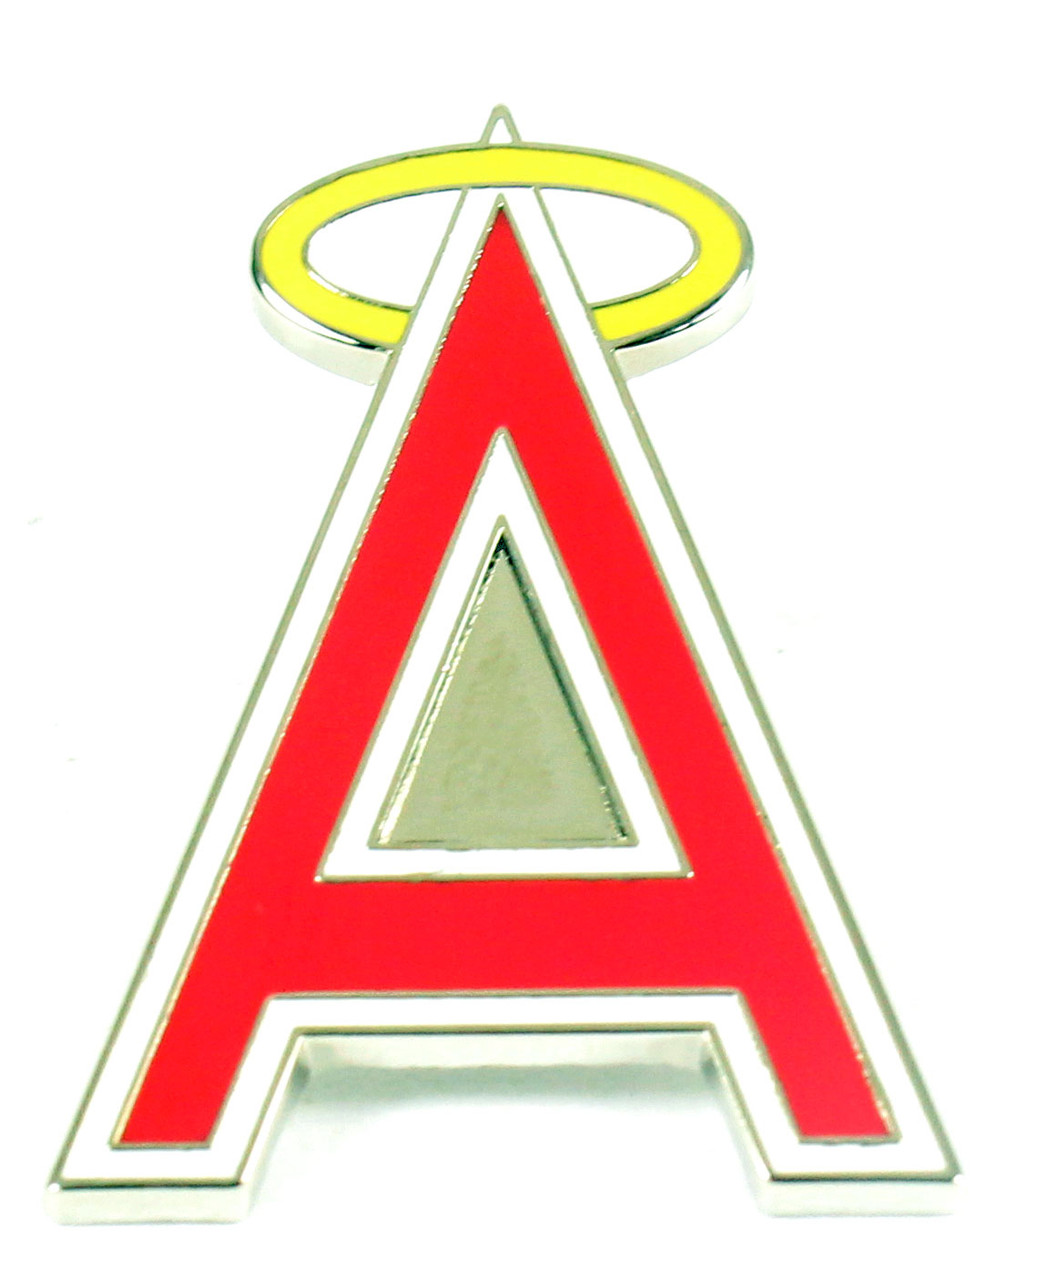 Pin on Los Angeles Angels/California Angels